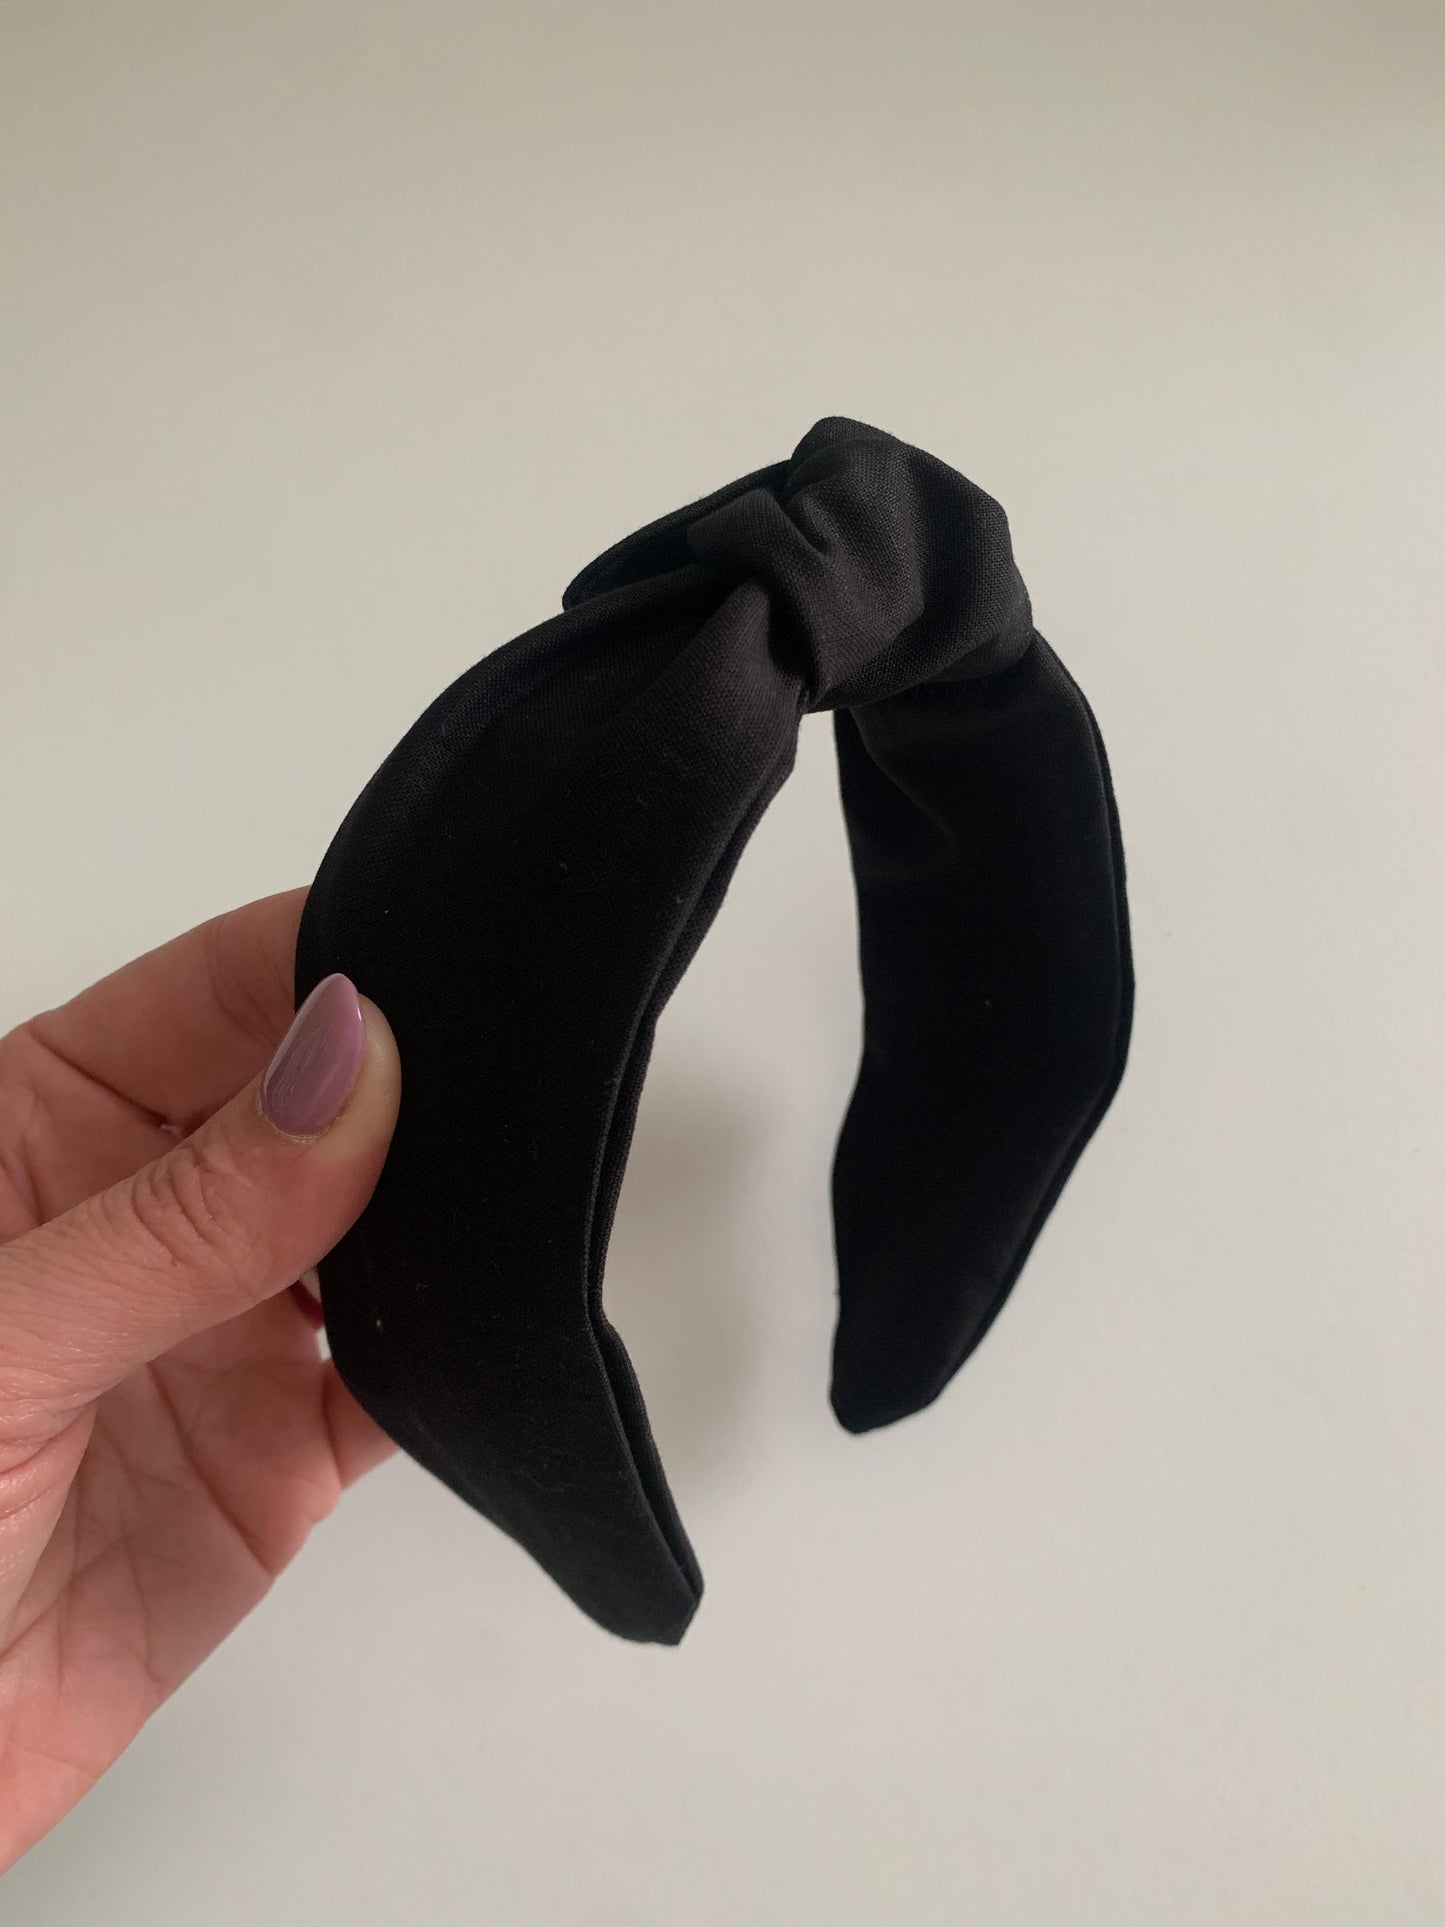 Solid Black - Knotted Headband